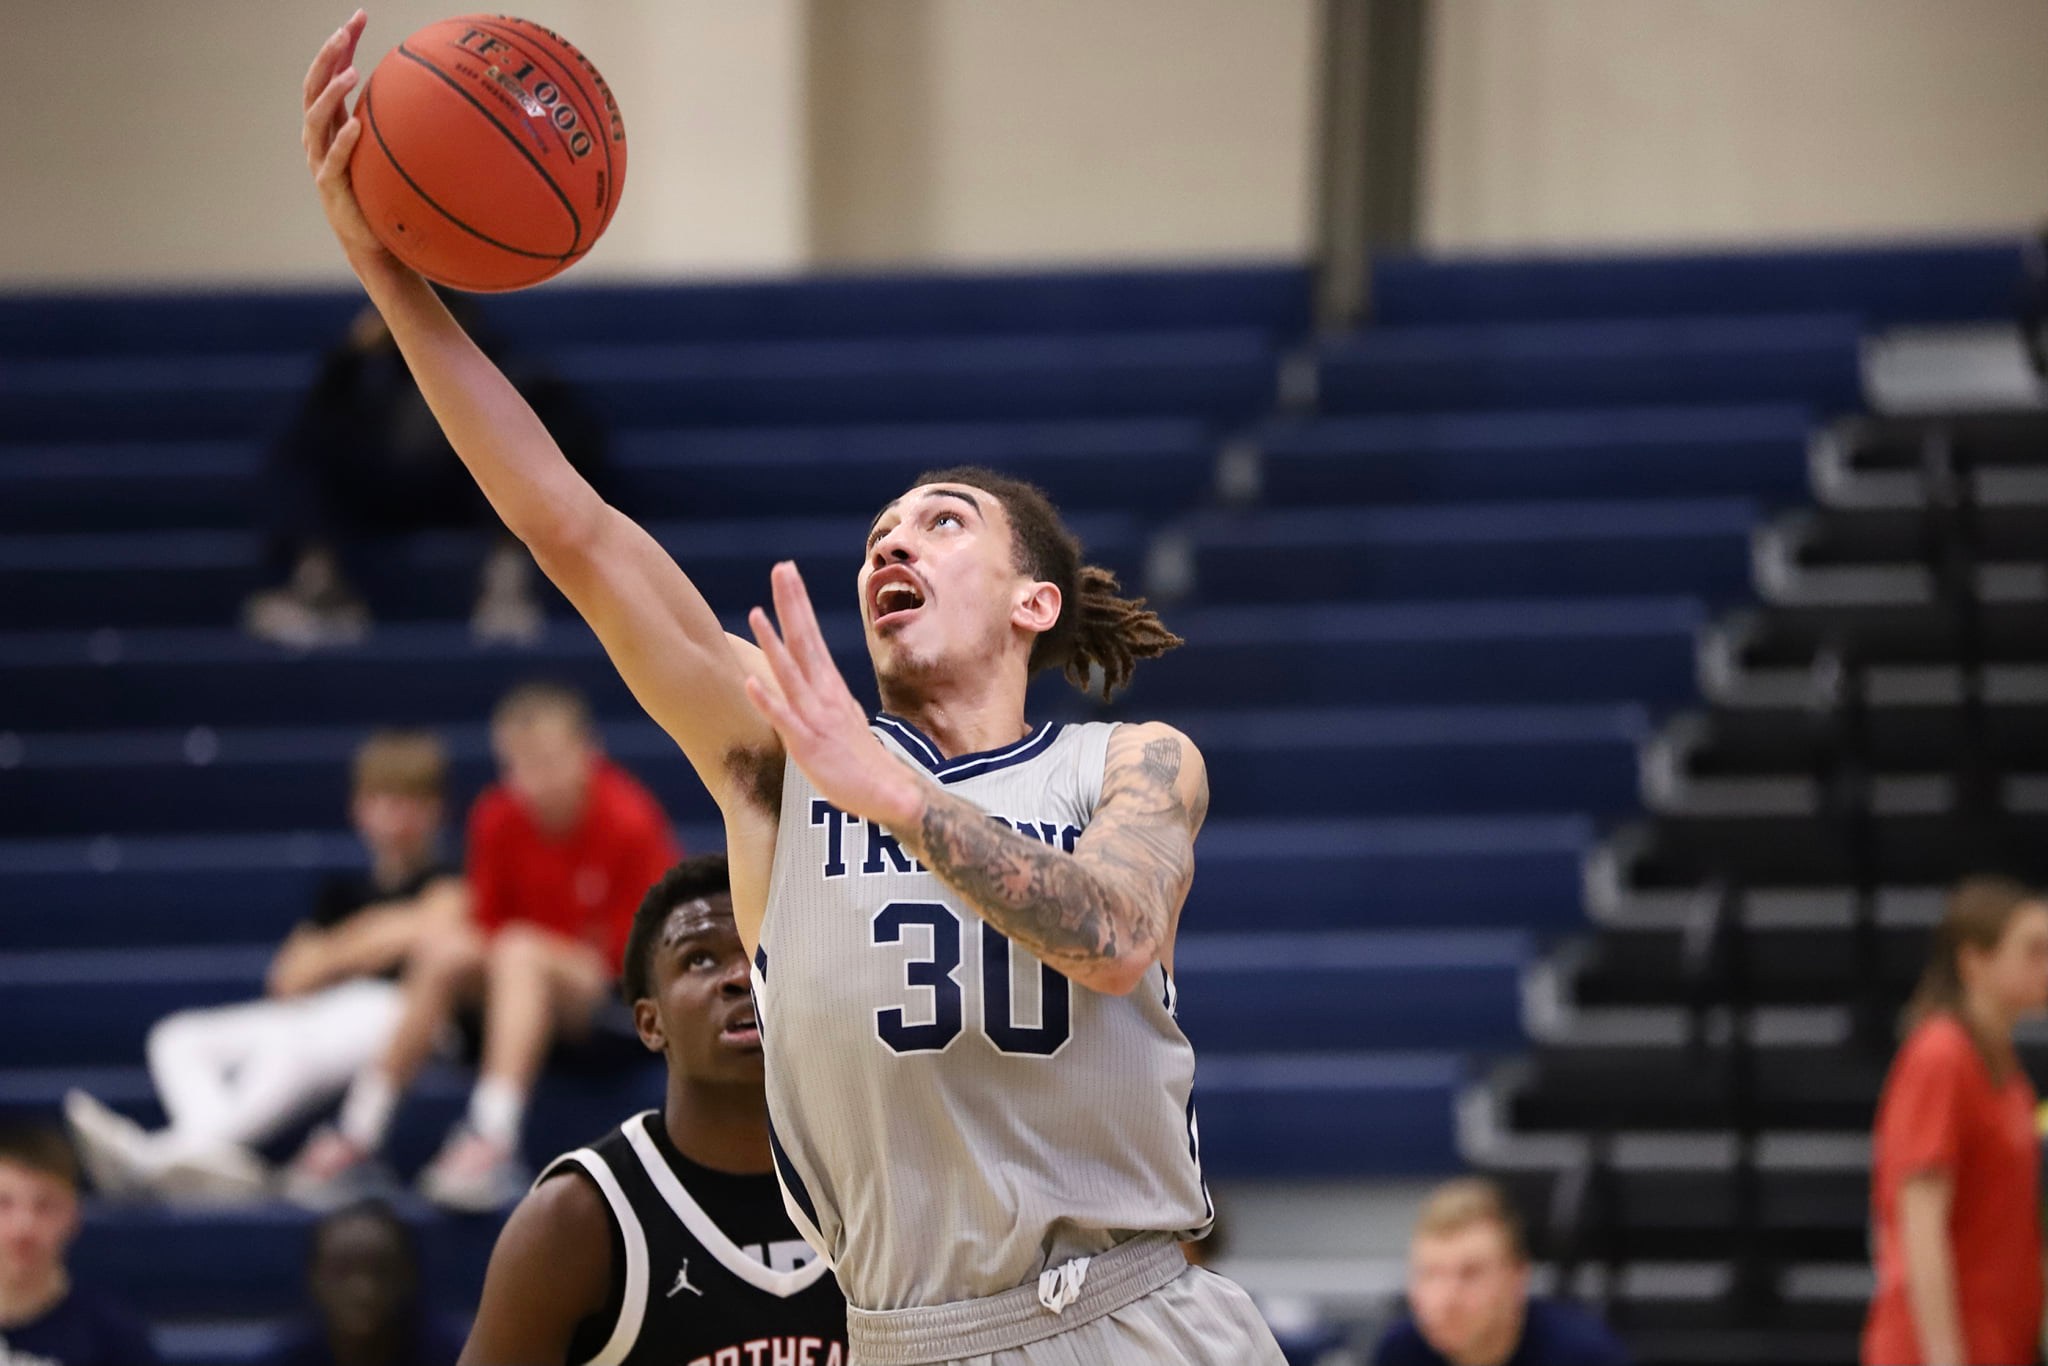 Iowa Central ends year with a win